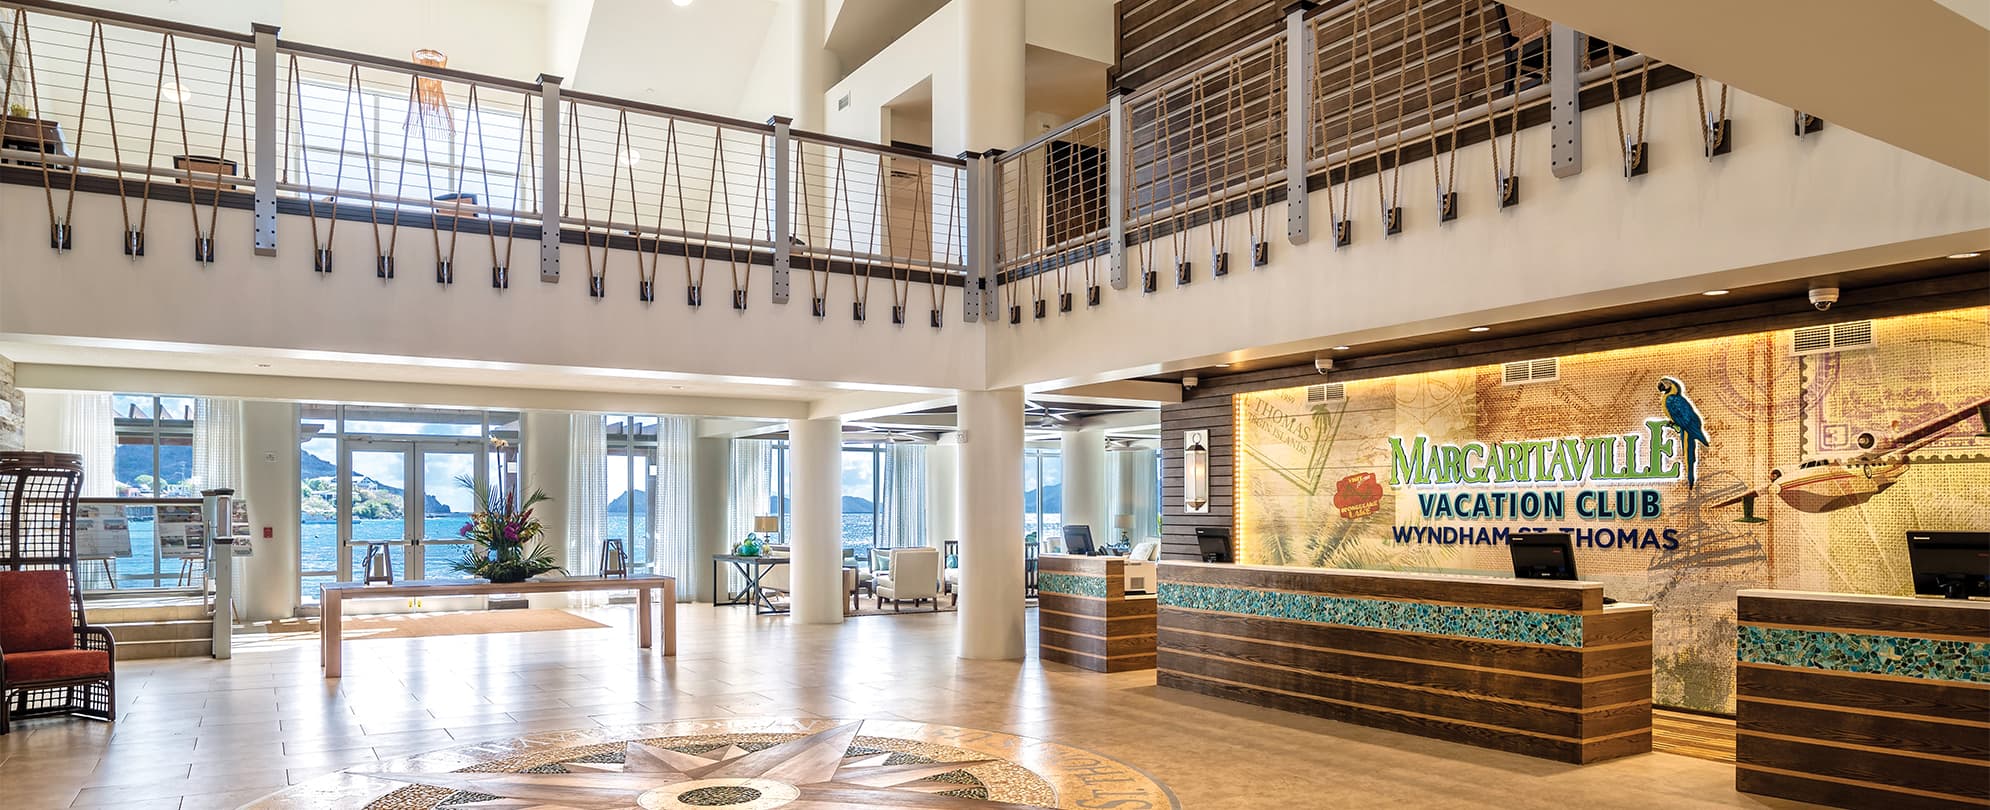 The lobby and check-in counters at Margaritaville Vacation Club by Wyndham - St. Thomas.